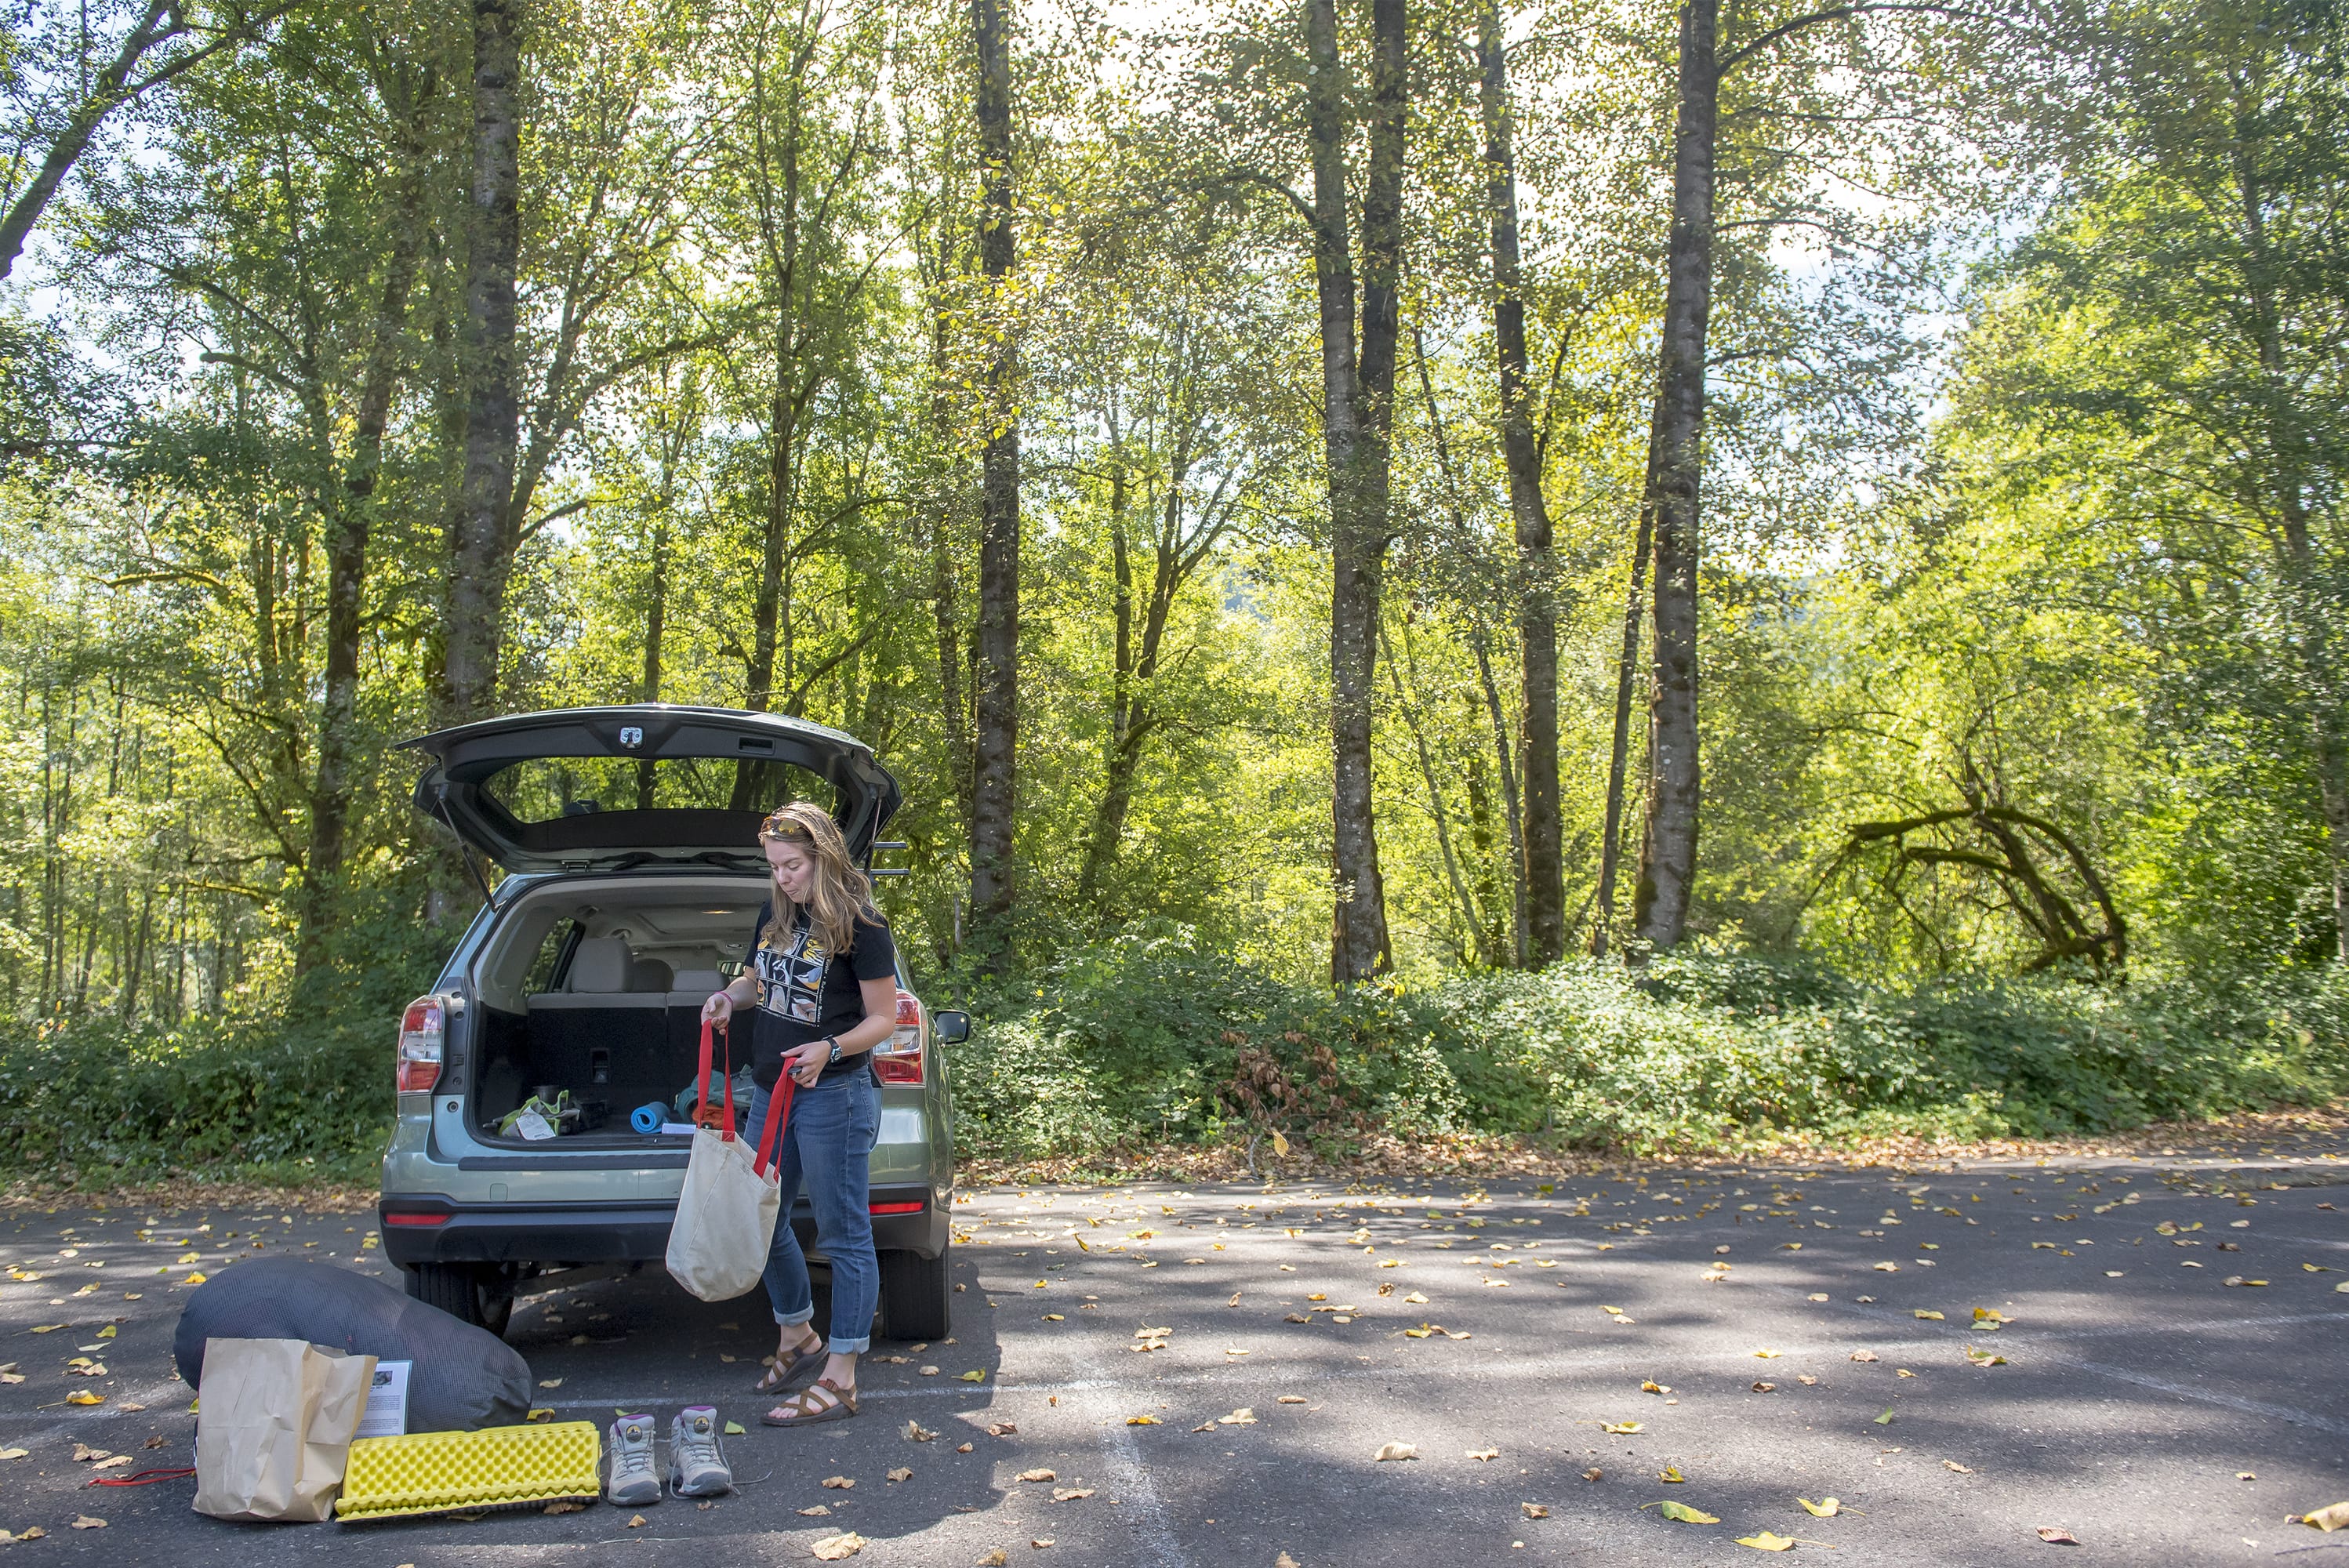 Sarah Croston, assistant guide and educator at the Mount St. Helens Institute takes stock of her equipment while preparing to lead a hike to the Mount. St. Helens crater.